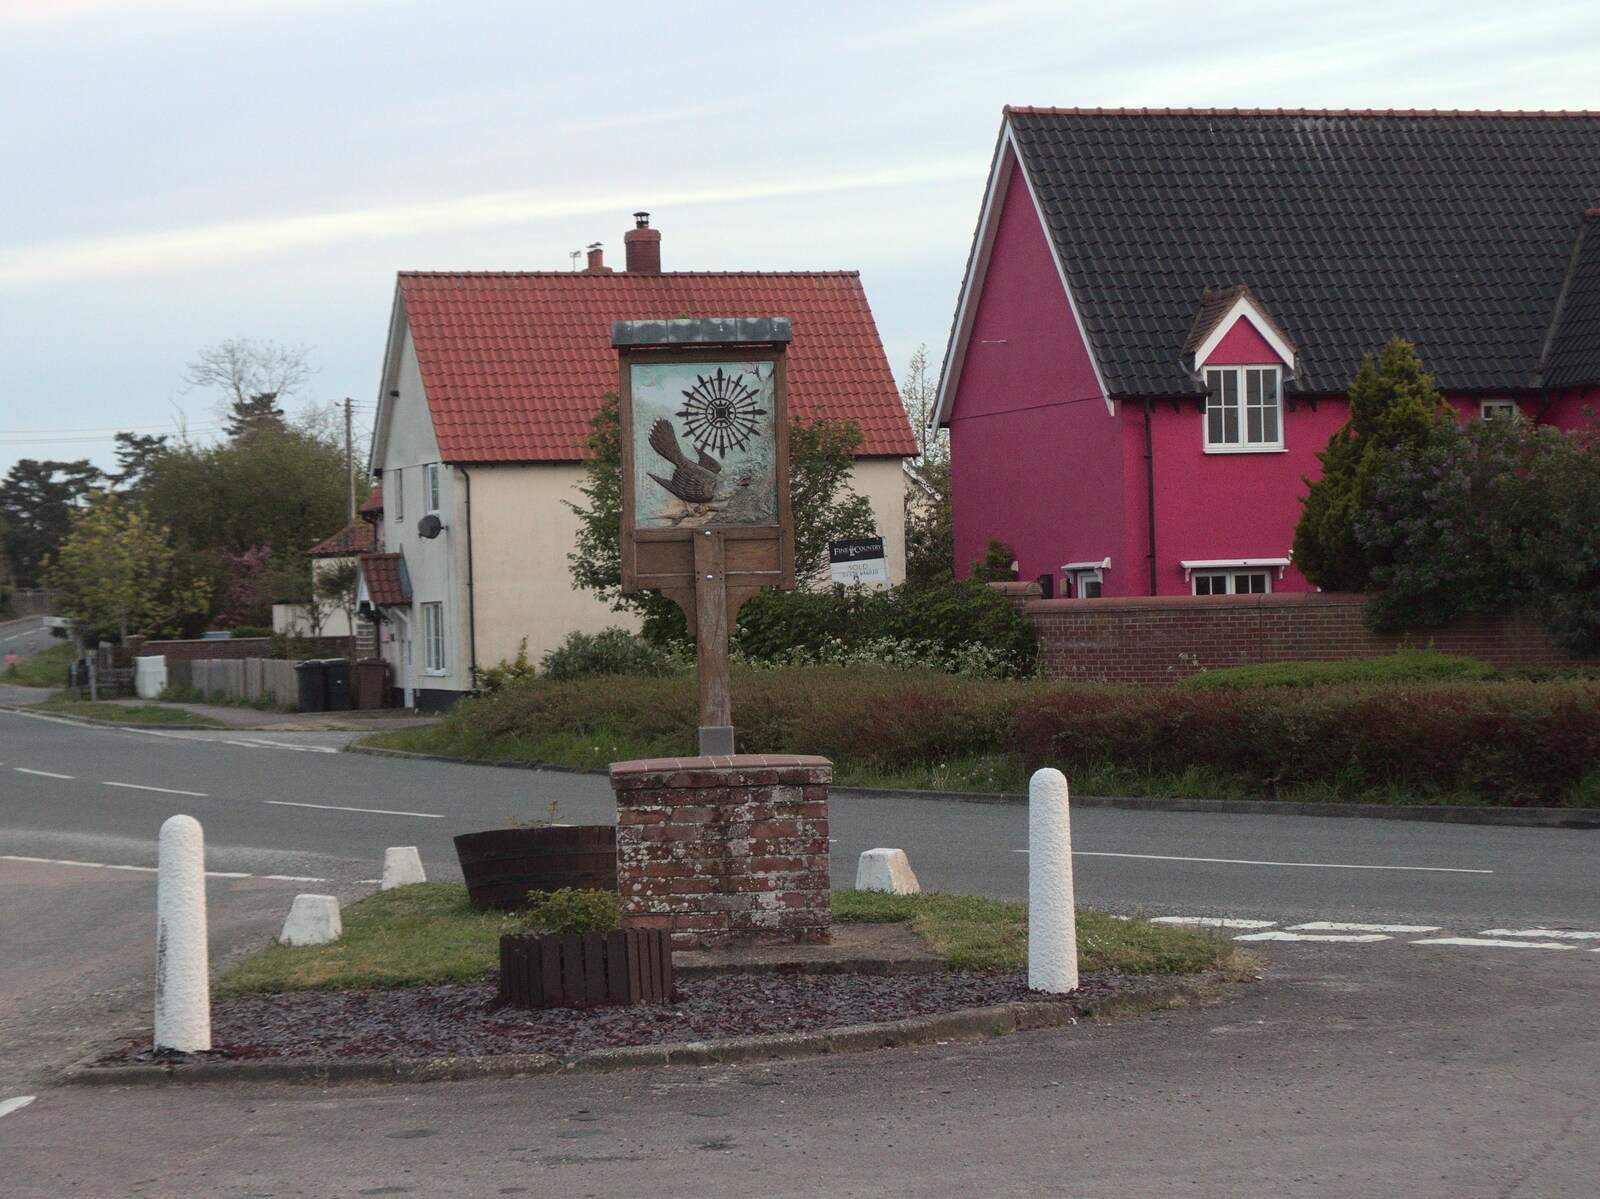 The Yaxley village sign from The BSCC at the King's Head, Brockdish, Norfolk - 13th May 2021